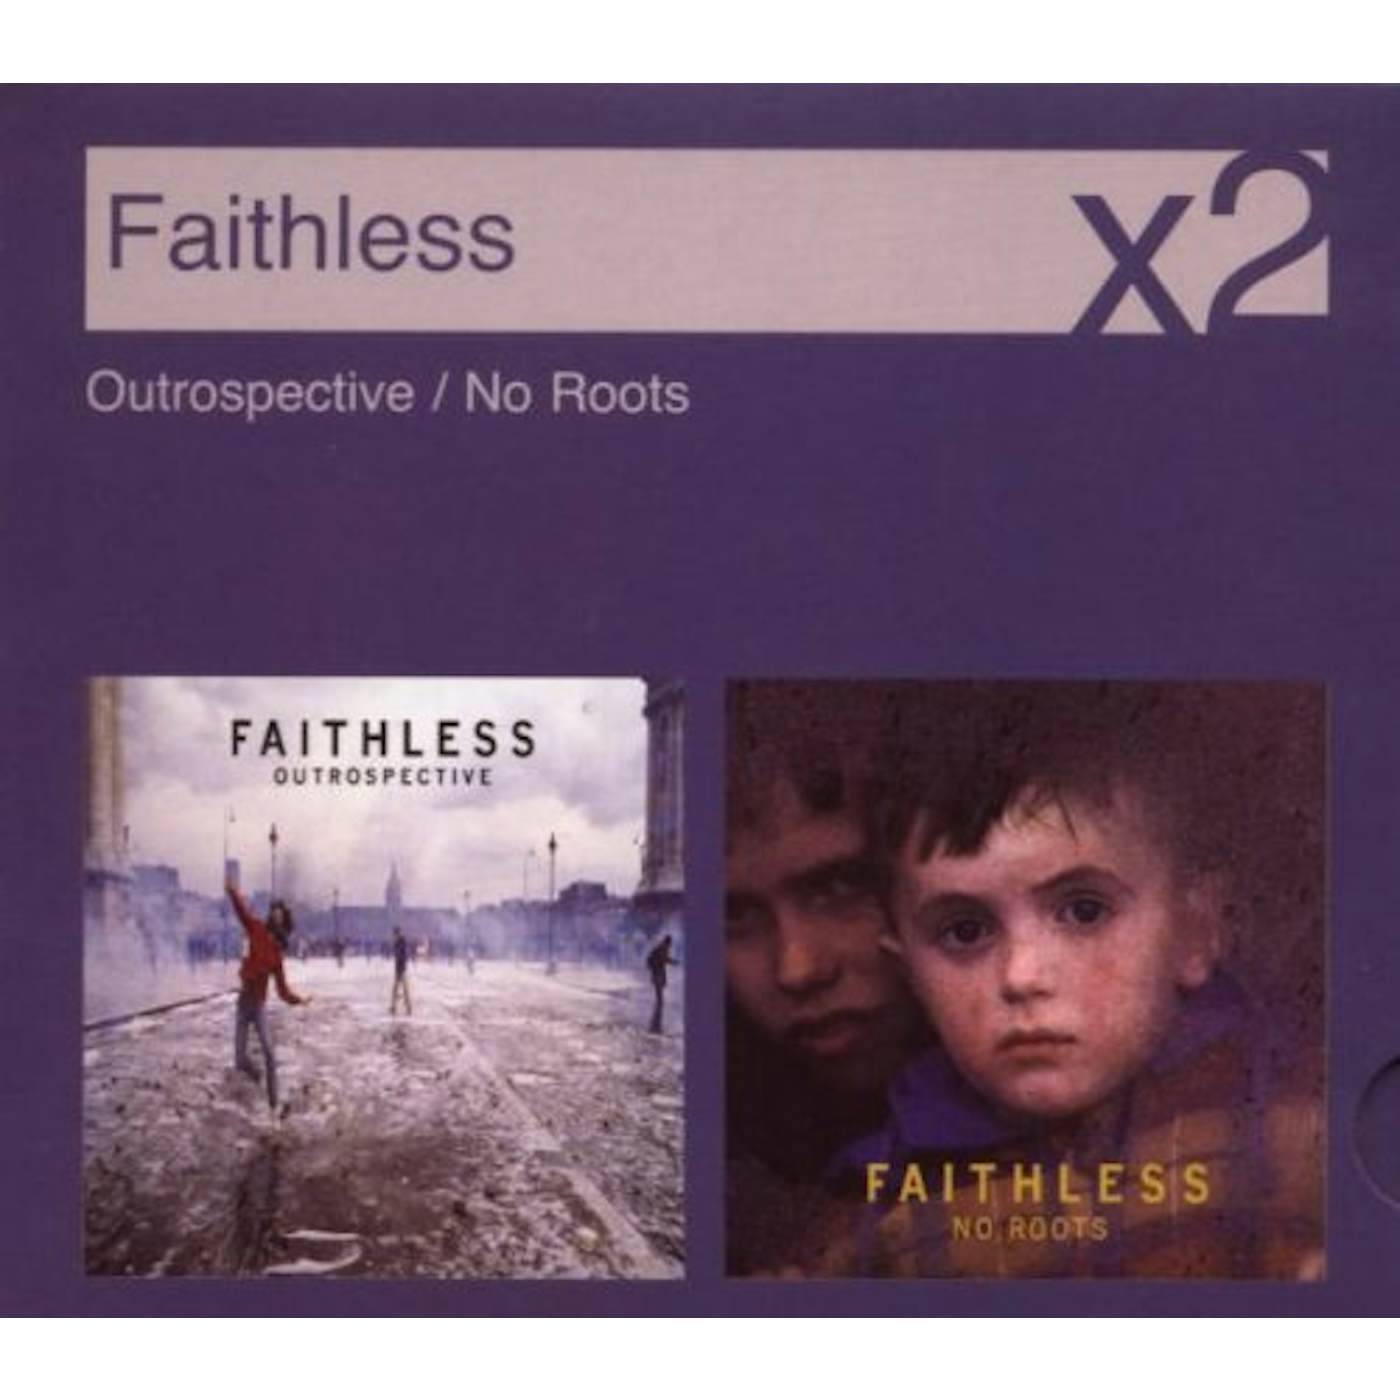 Faithless OUTROSPECTIVE / NO ROOTS CD